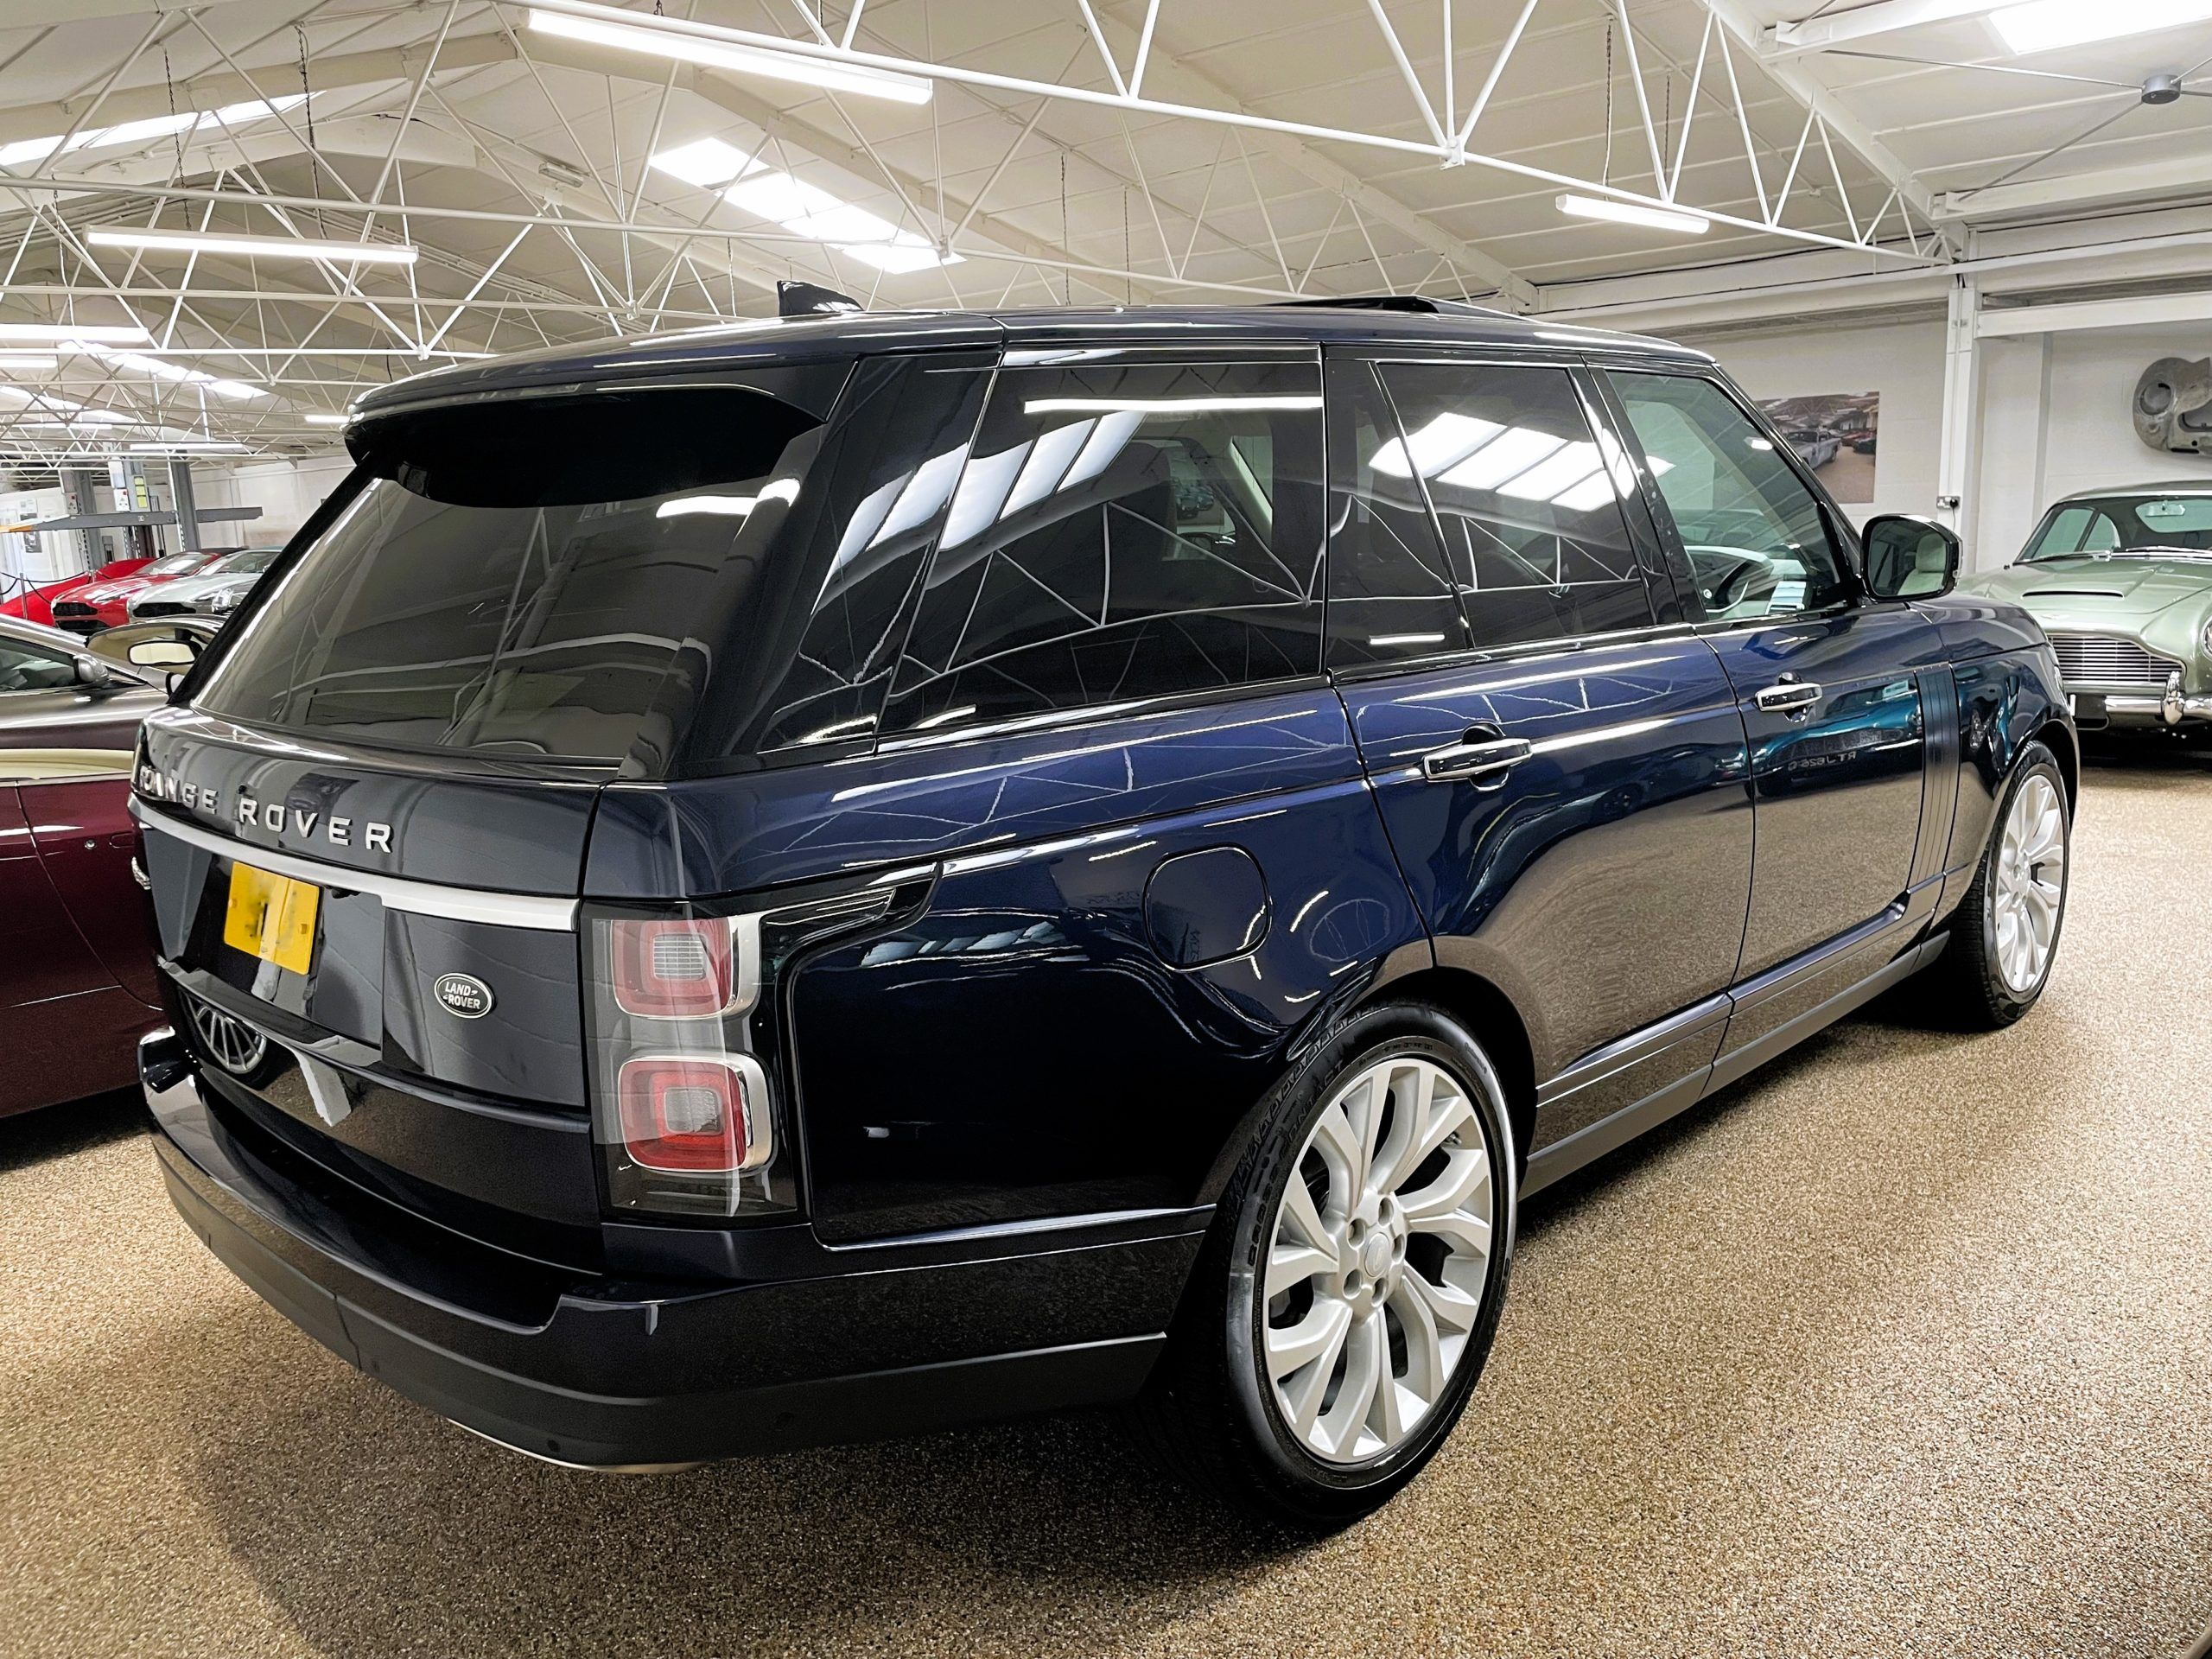 Used Ranger Rover for sale